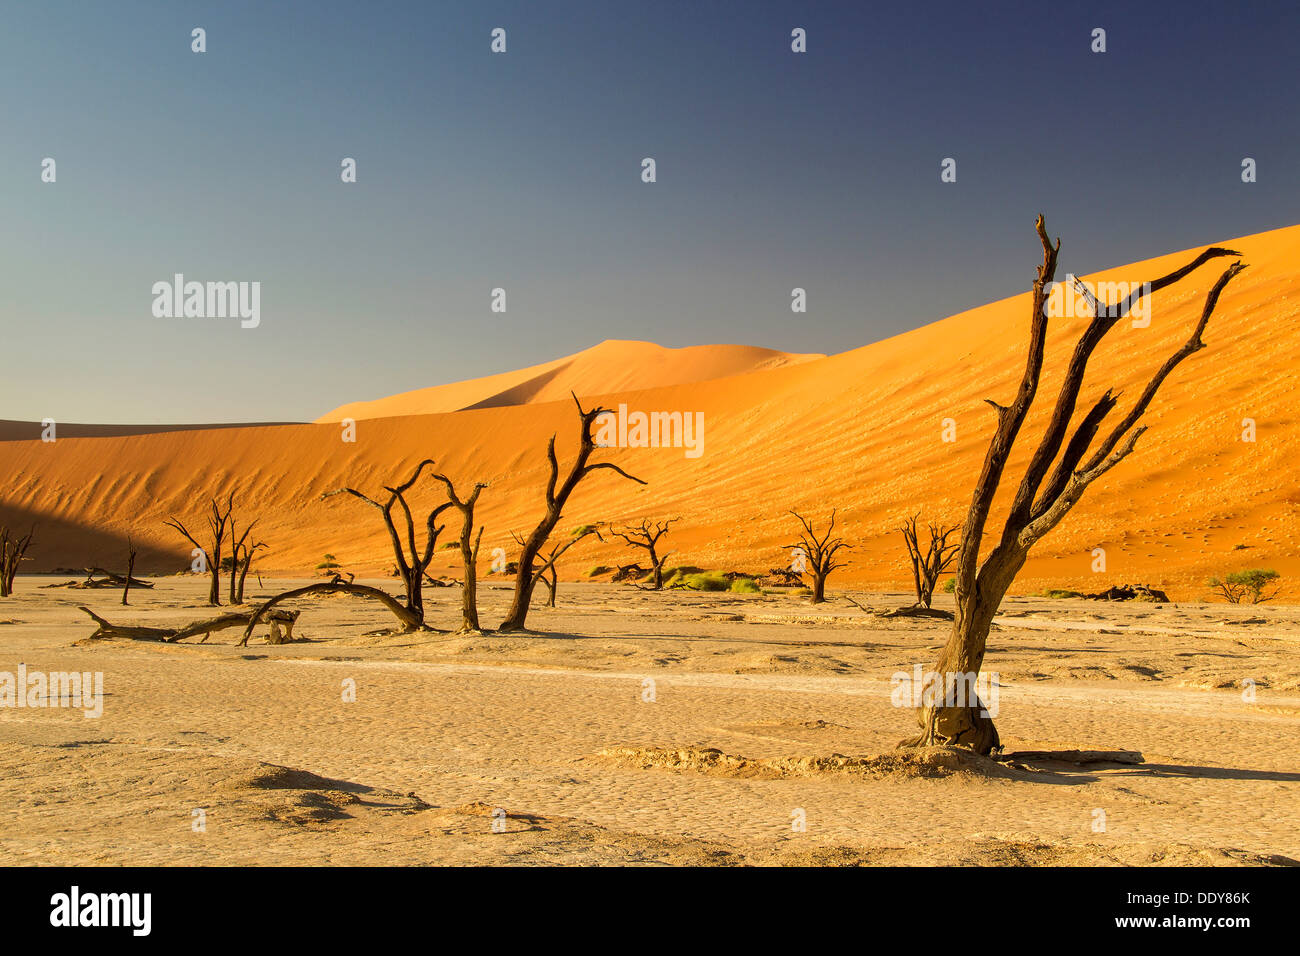 Dead trees in front of a sand dune in the evening light Stock Photo